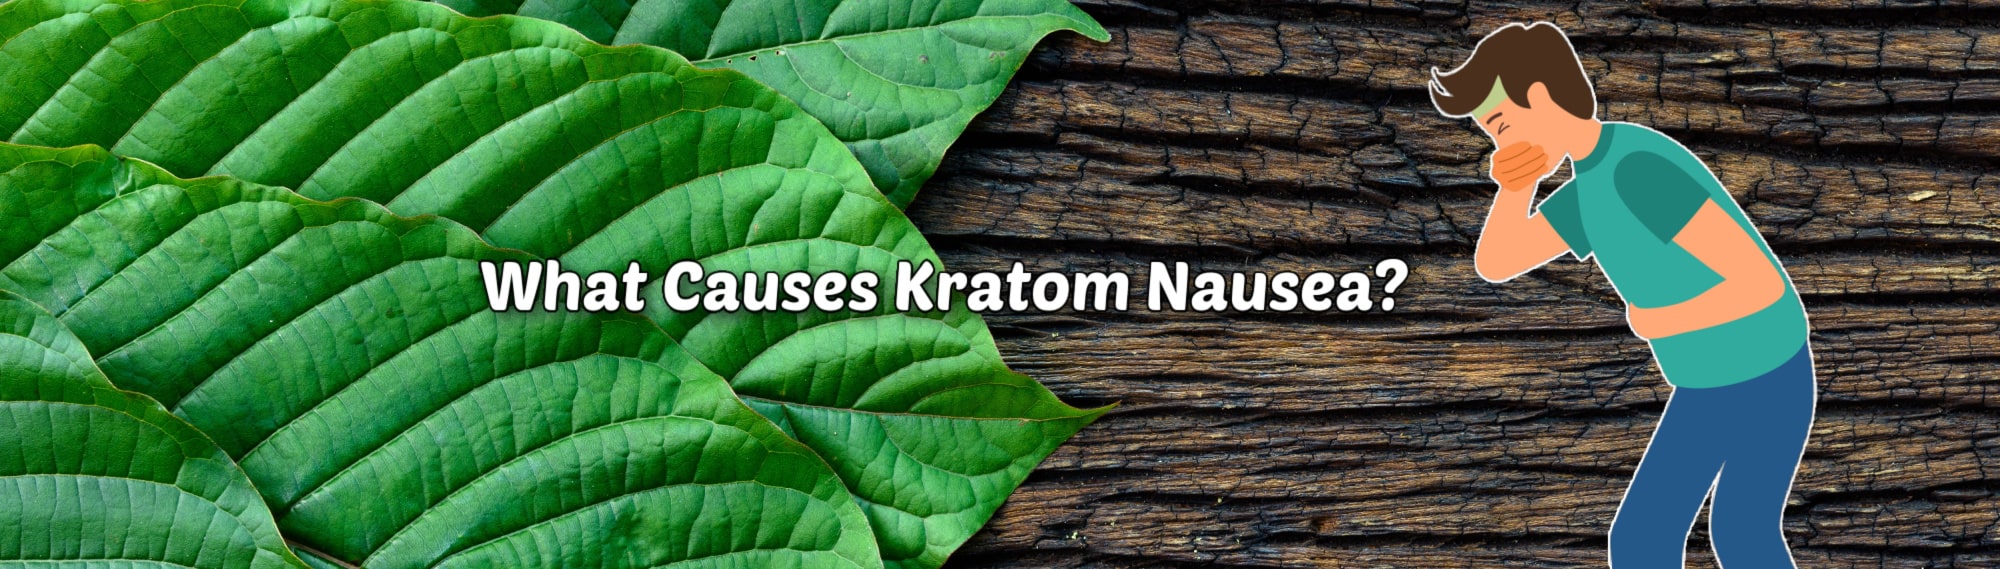 Kratom Nausea: Causes and How to Prevent It